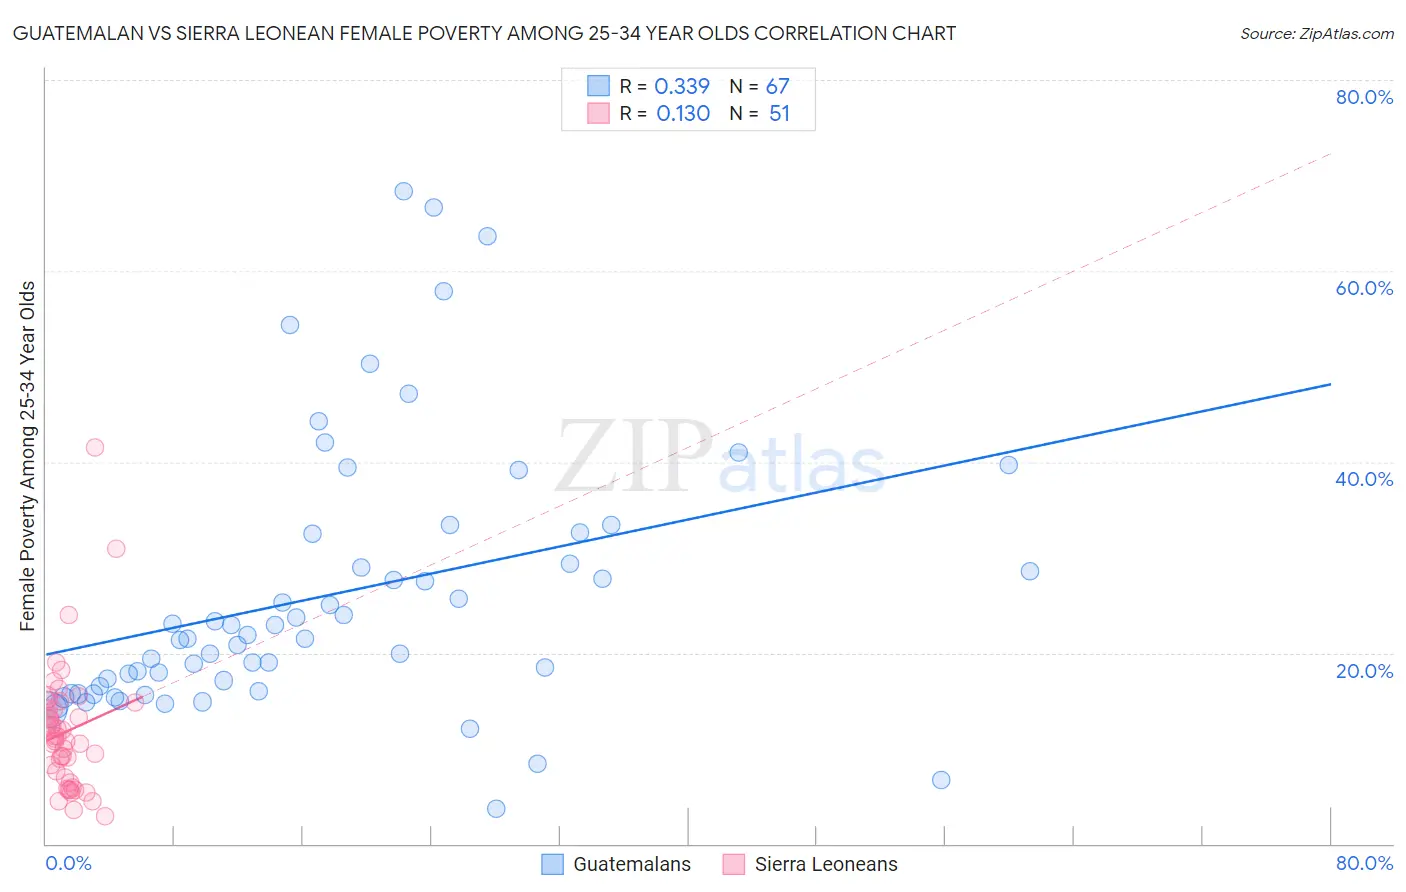 Guatemalan vs Sierra Leonean Female Poverty Among 25-34 Year Olds